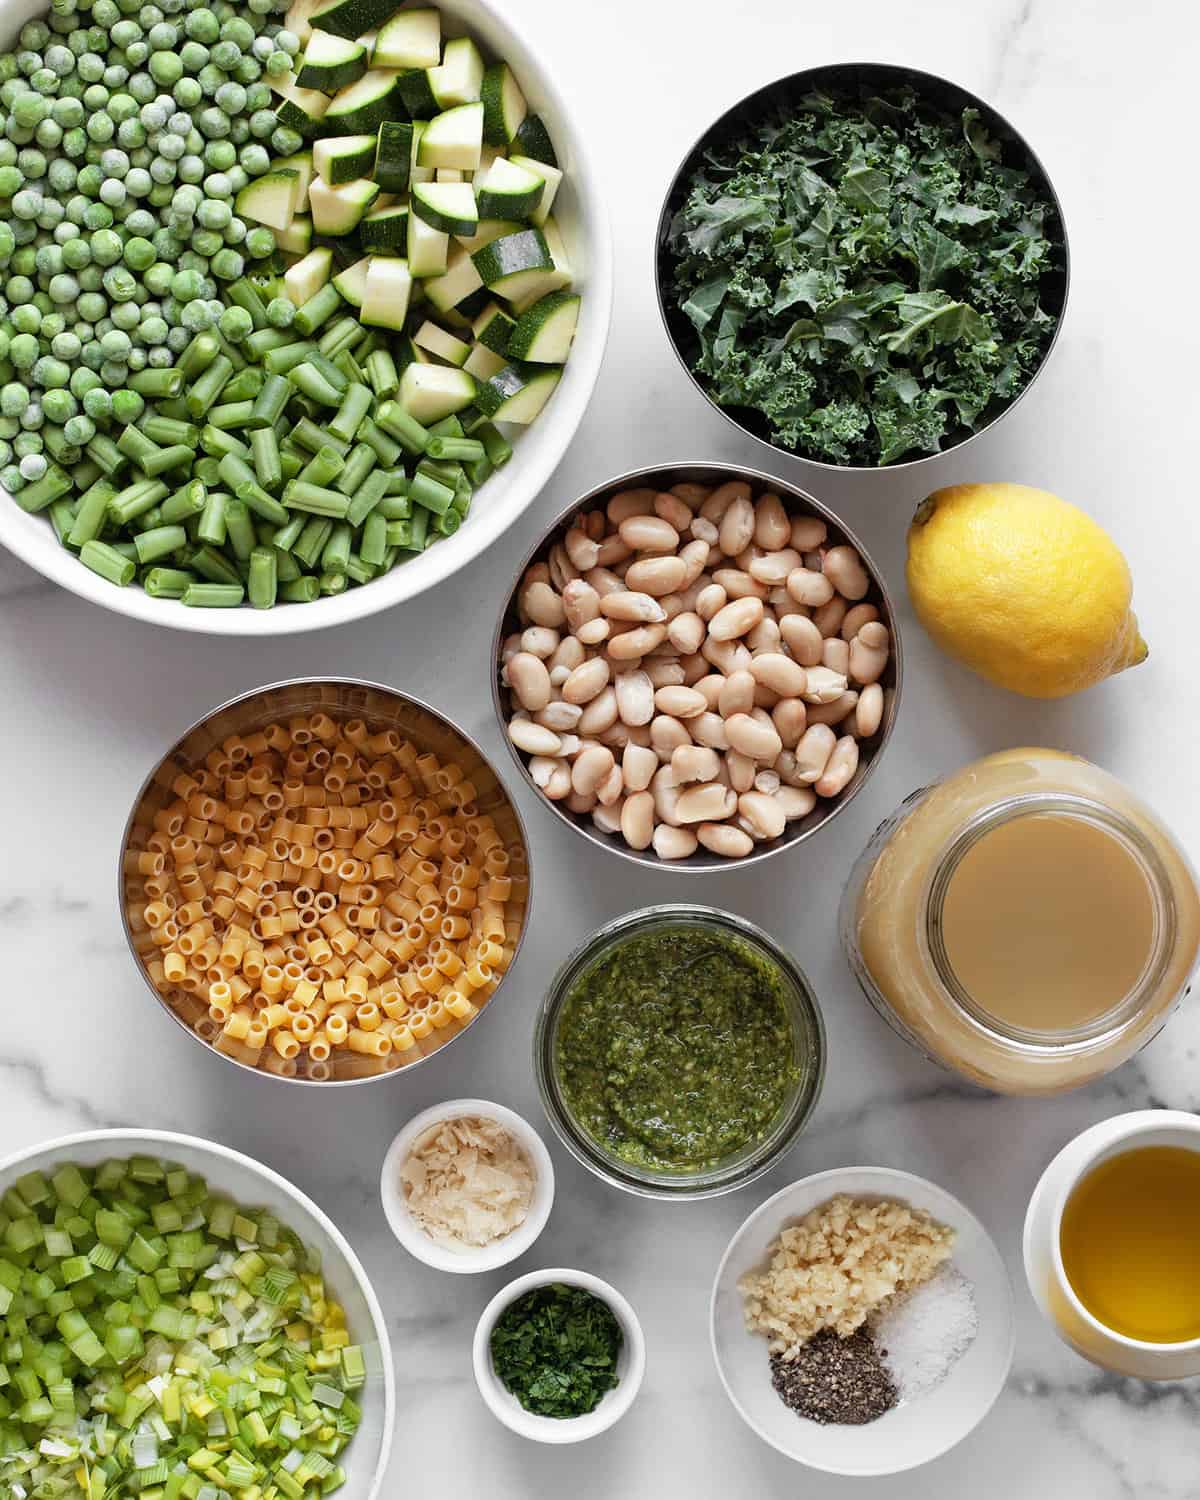 Ingredients including leeks, celery, green beans, zucchini, peas, kale, white beans, broth and olive oil.